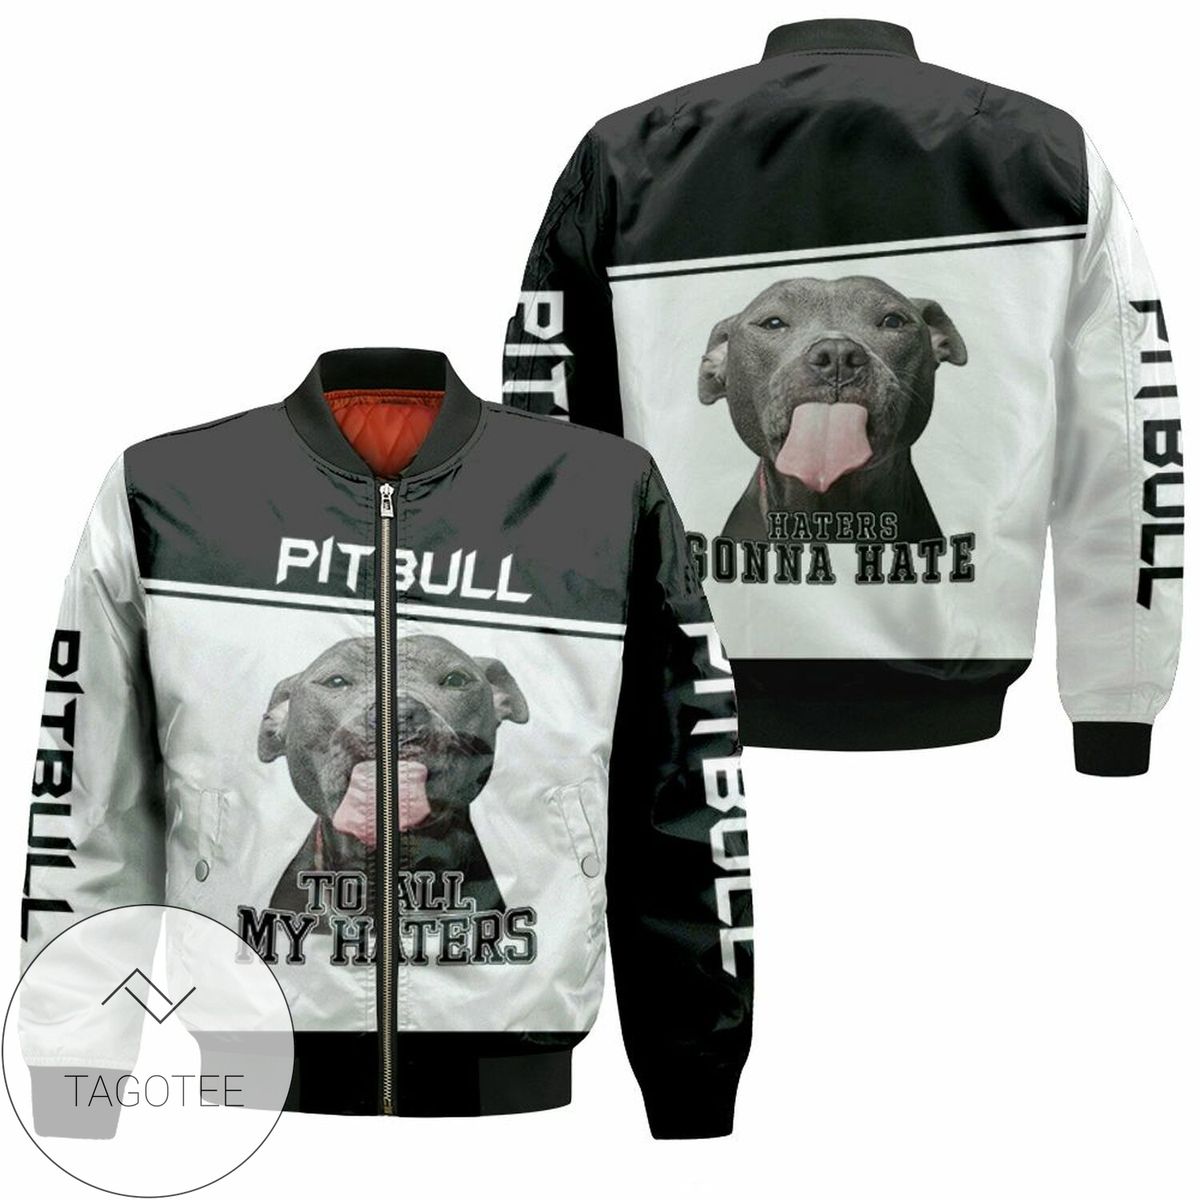 To All My Haters Pitbull Lover 3D T Shirt Hoodie Sweater Bomber Jacket